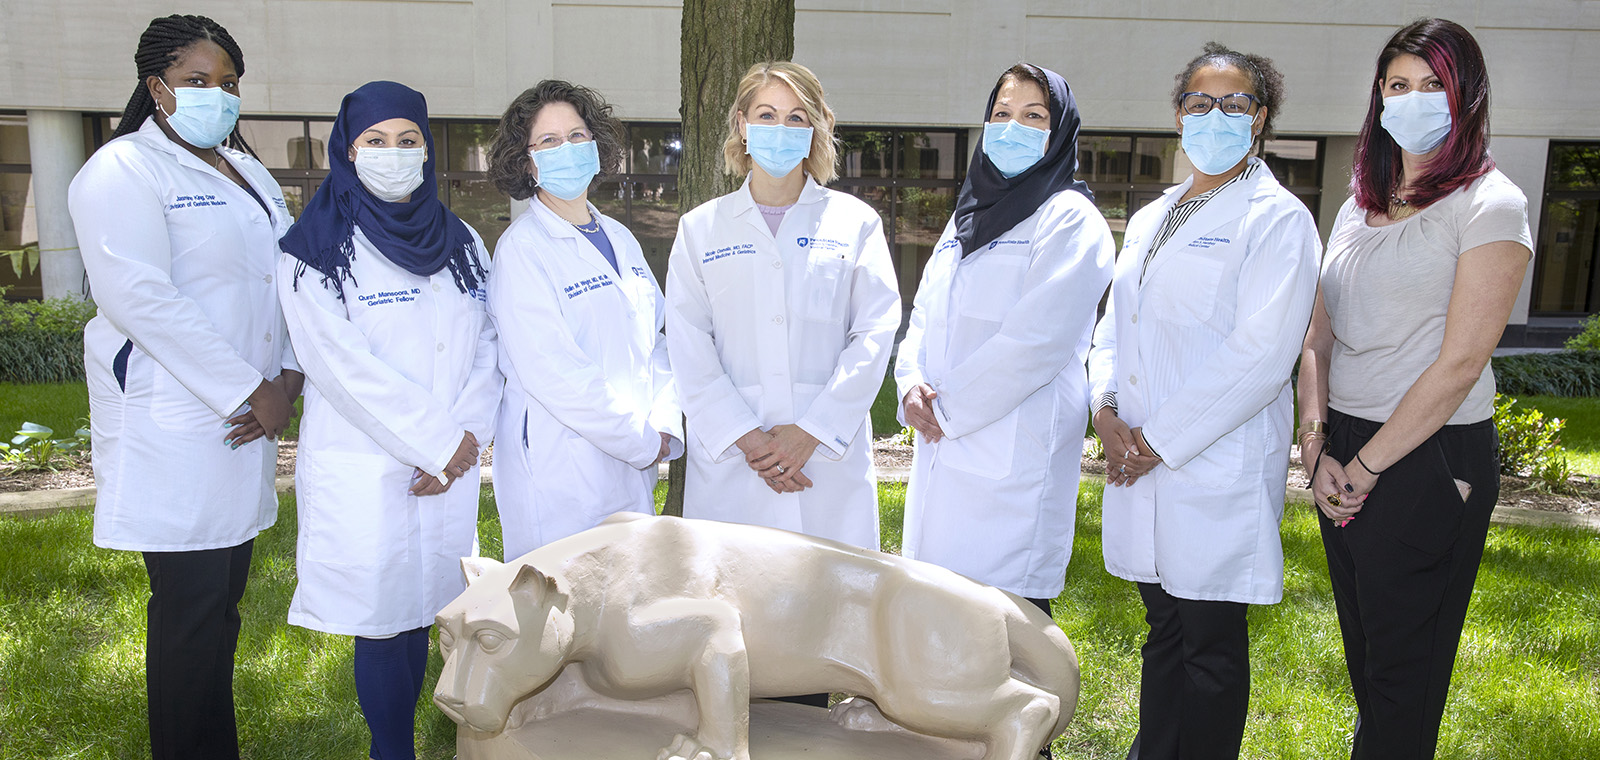 A group of 7 women from the Department of Medicine's Division of Geriatric Medicine stand outdoors, with trees in the background and a lion statue in the foreground, wearing white coats, surgical masks and business professional clothing.